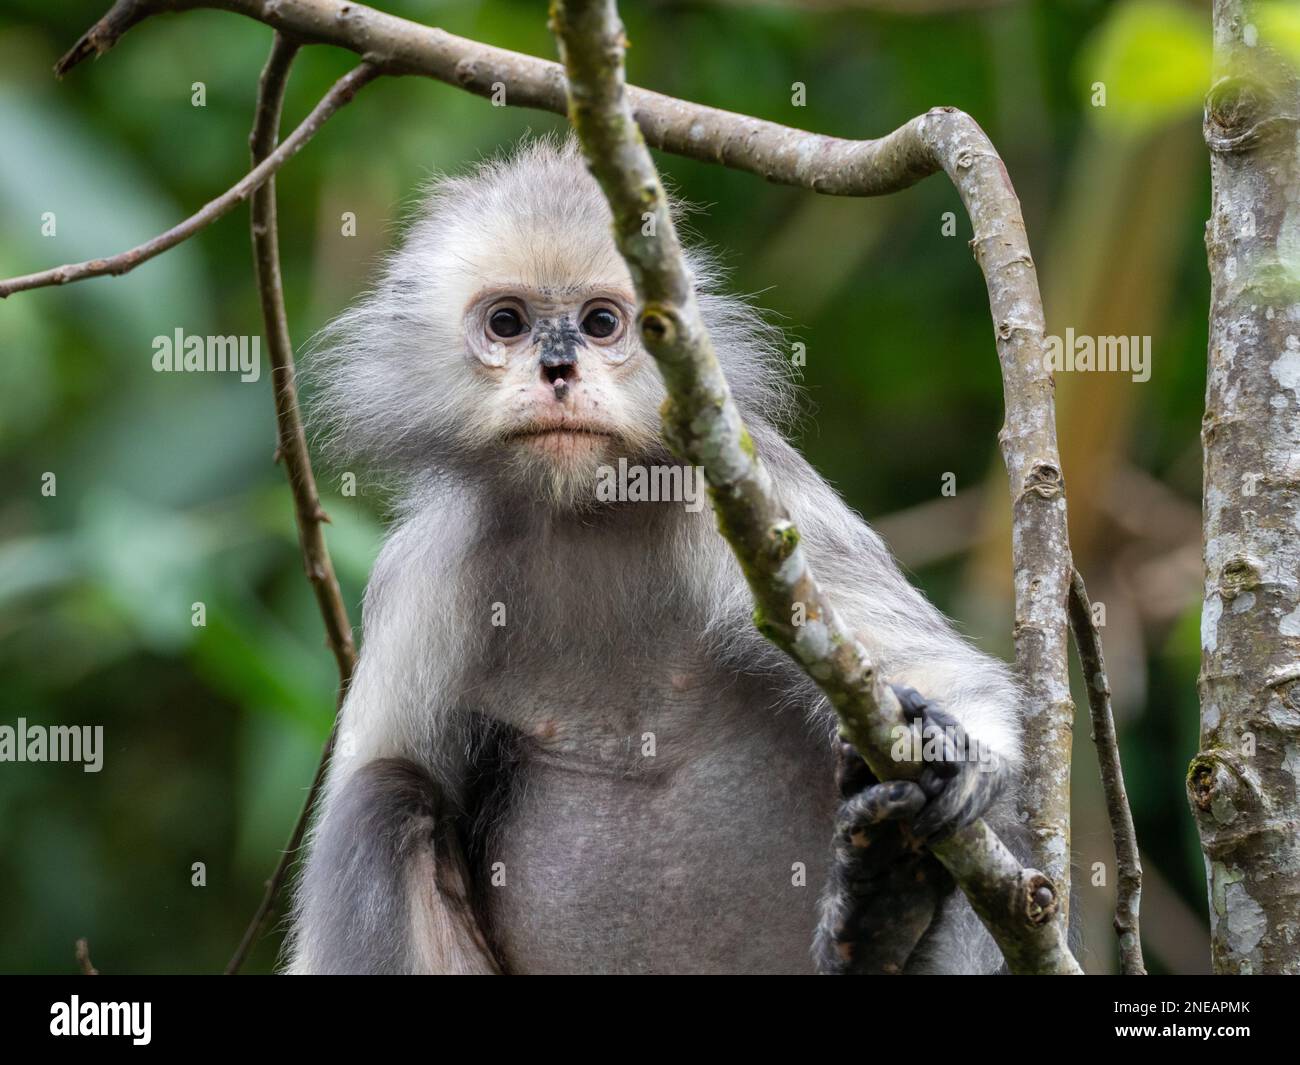 Dusky leaf monkey, Trachypithecus obscurus, a beautiful monkey from Southeast Asia Stock Photo